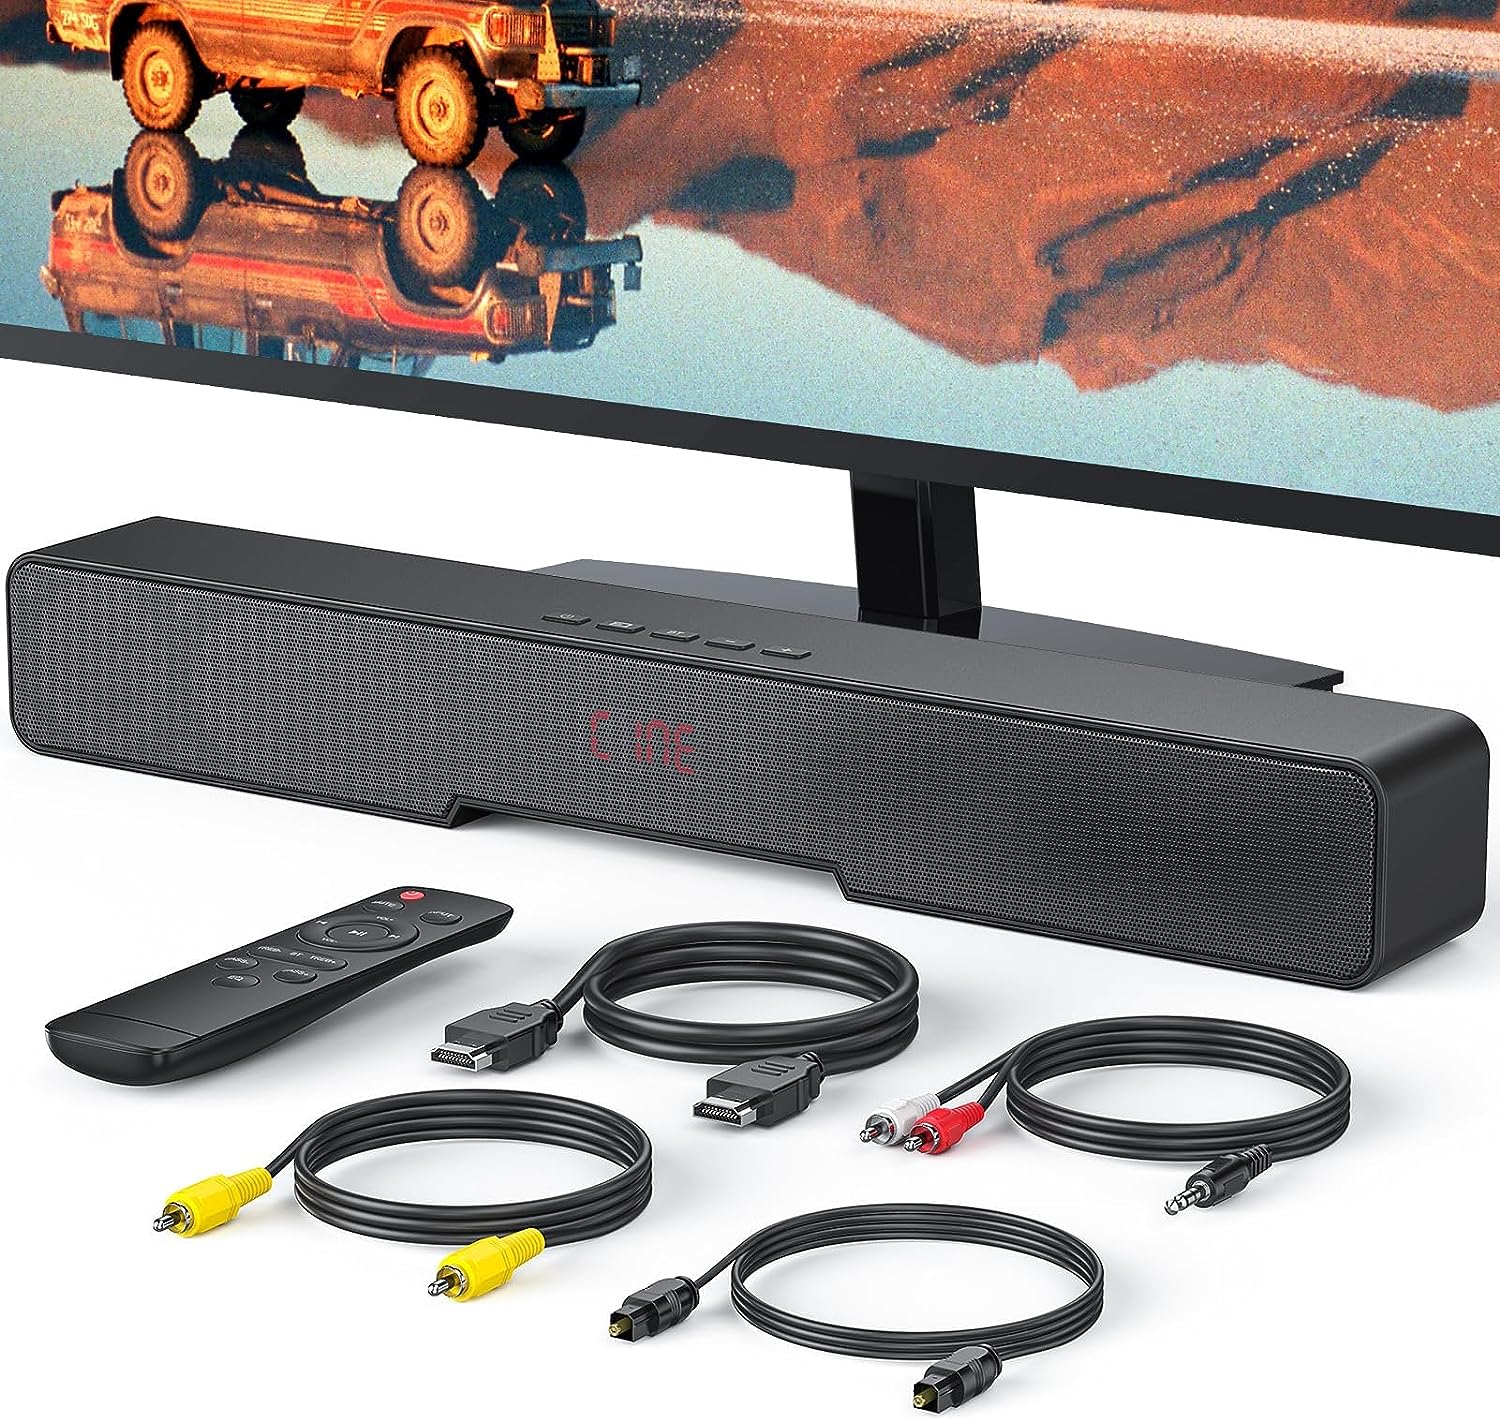 KOOSODIO Small Sound Bar for TV and PC Review